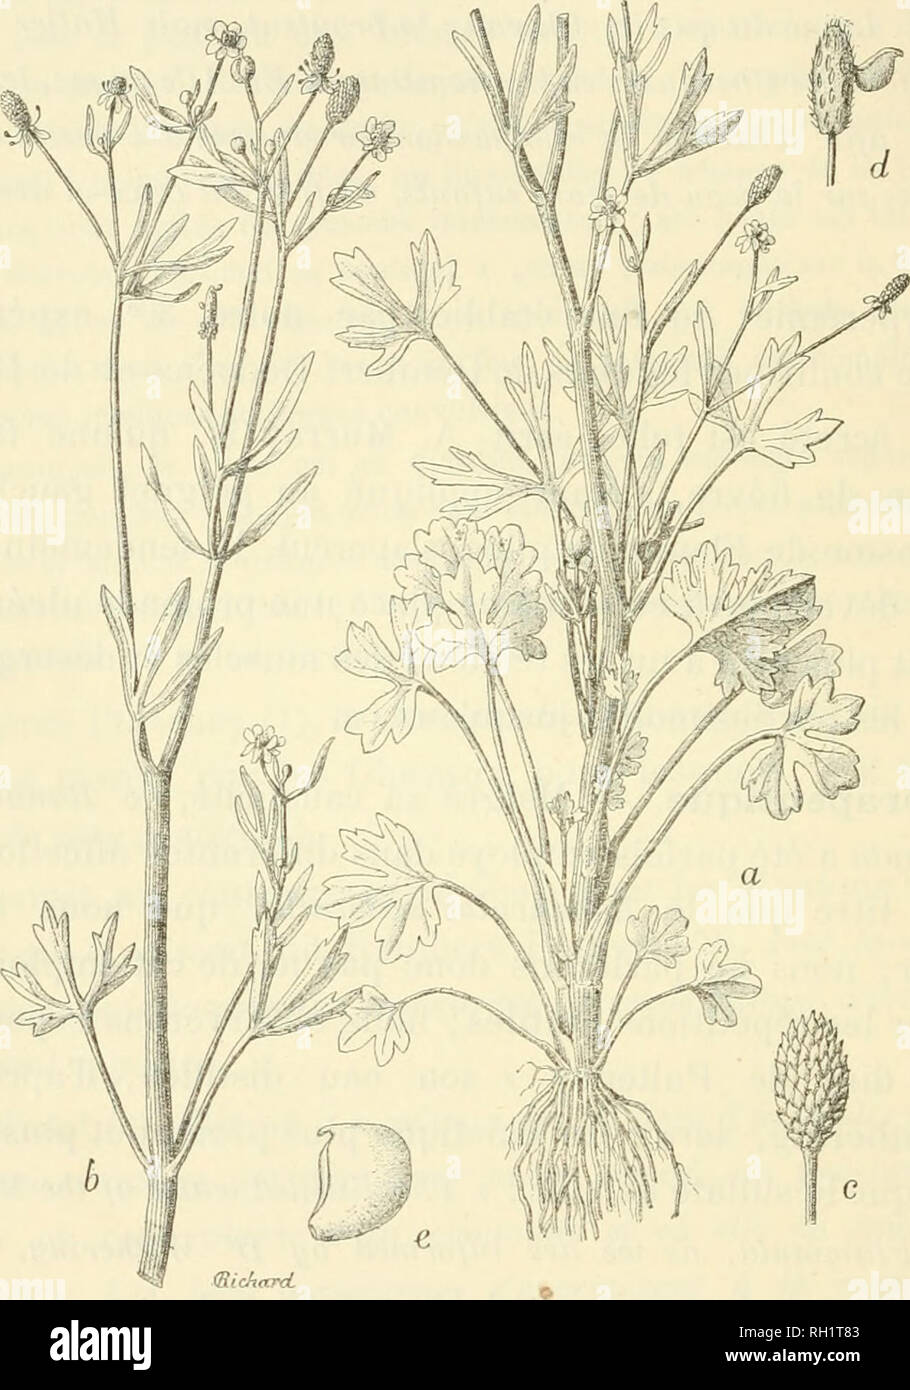 . Bulletin. Socit d'histoire naturelle d'Autun (France); Natural history; Natural history -- France. 290 A.-T. DE ROC ME BRUNE Ranunculus sceleratus Lin. Synonymie. — Ranunculus sceleuatus, Lin. Sj^. 776; DC, Prodr. I, 34;. Baxunculus sceleratus, Lin. Fig. 52: a. b. Port de la plante. —Fig. 53 : c. Fruit. — Fig. 51 : (/. Réceptacle. Fig. 55 : e. Caipolle. Rchl:). le. IV, l. H, f. 1598; Coss. Cump. FI. Ail., H, 33 ; Raltand et Trab. FI. Alger., 8 ; Moris, Sard., F, 33 ; FJecatonia i'alustris, Loureir, FL Cochinch. Spacli. Suites a Bujf. VU, 198.. Please note that these images are extracted from Stock Photo